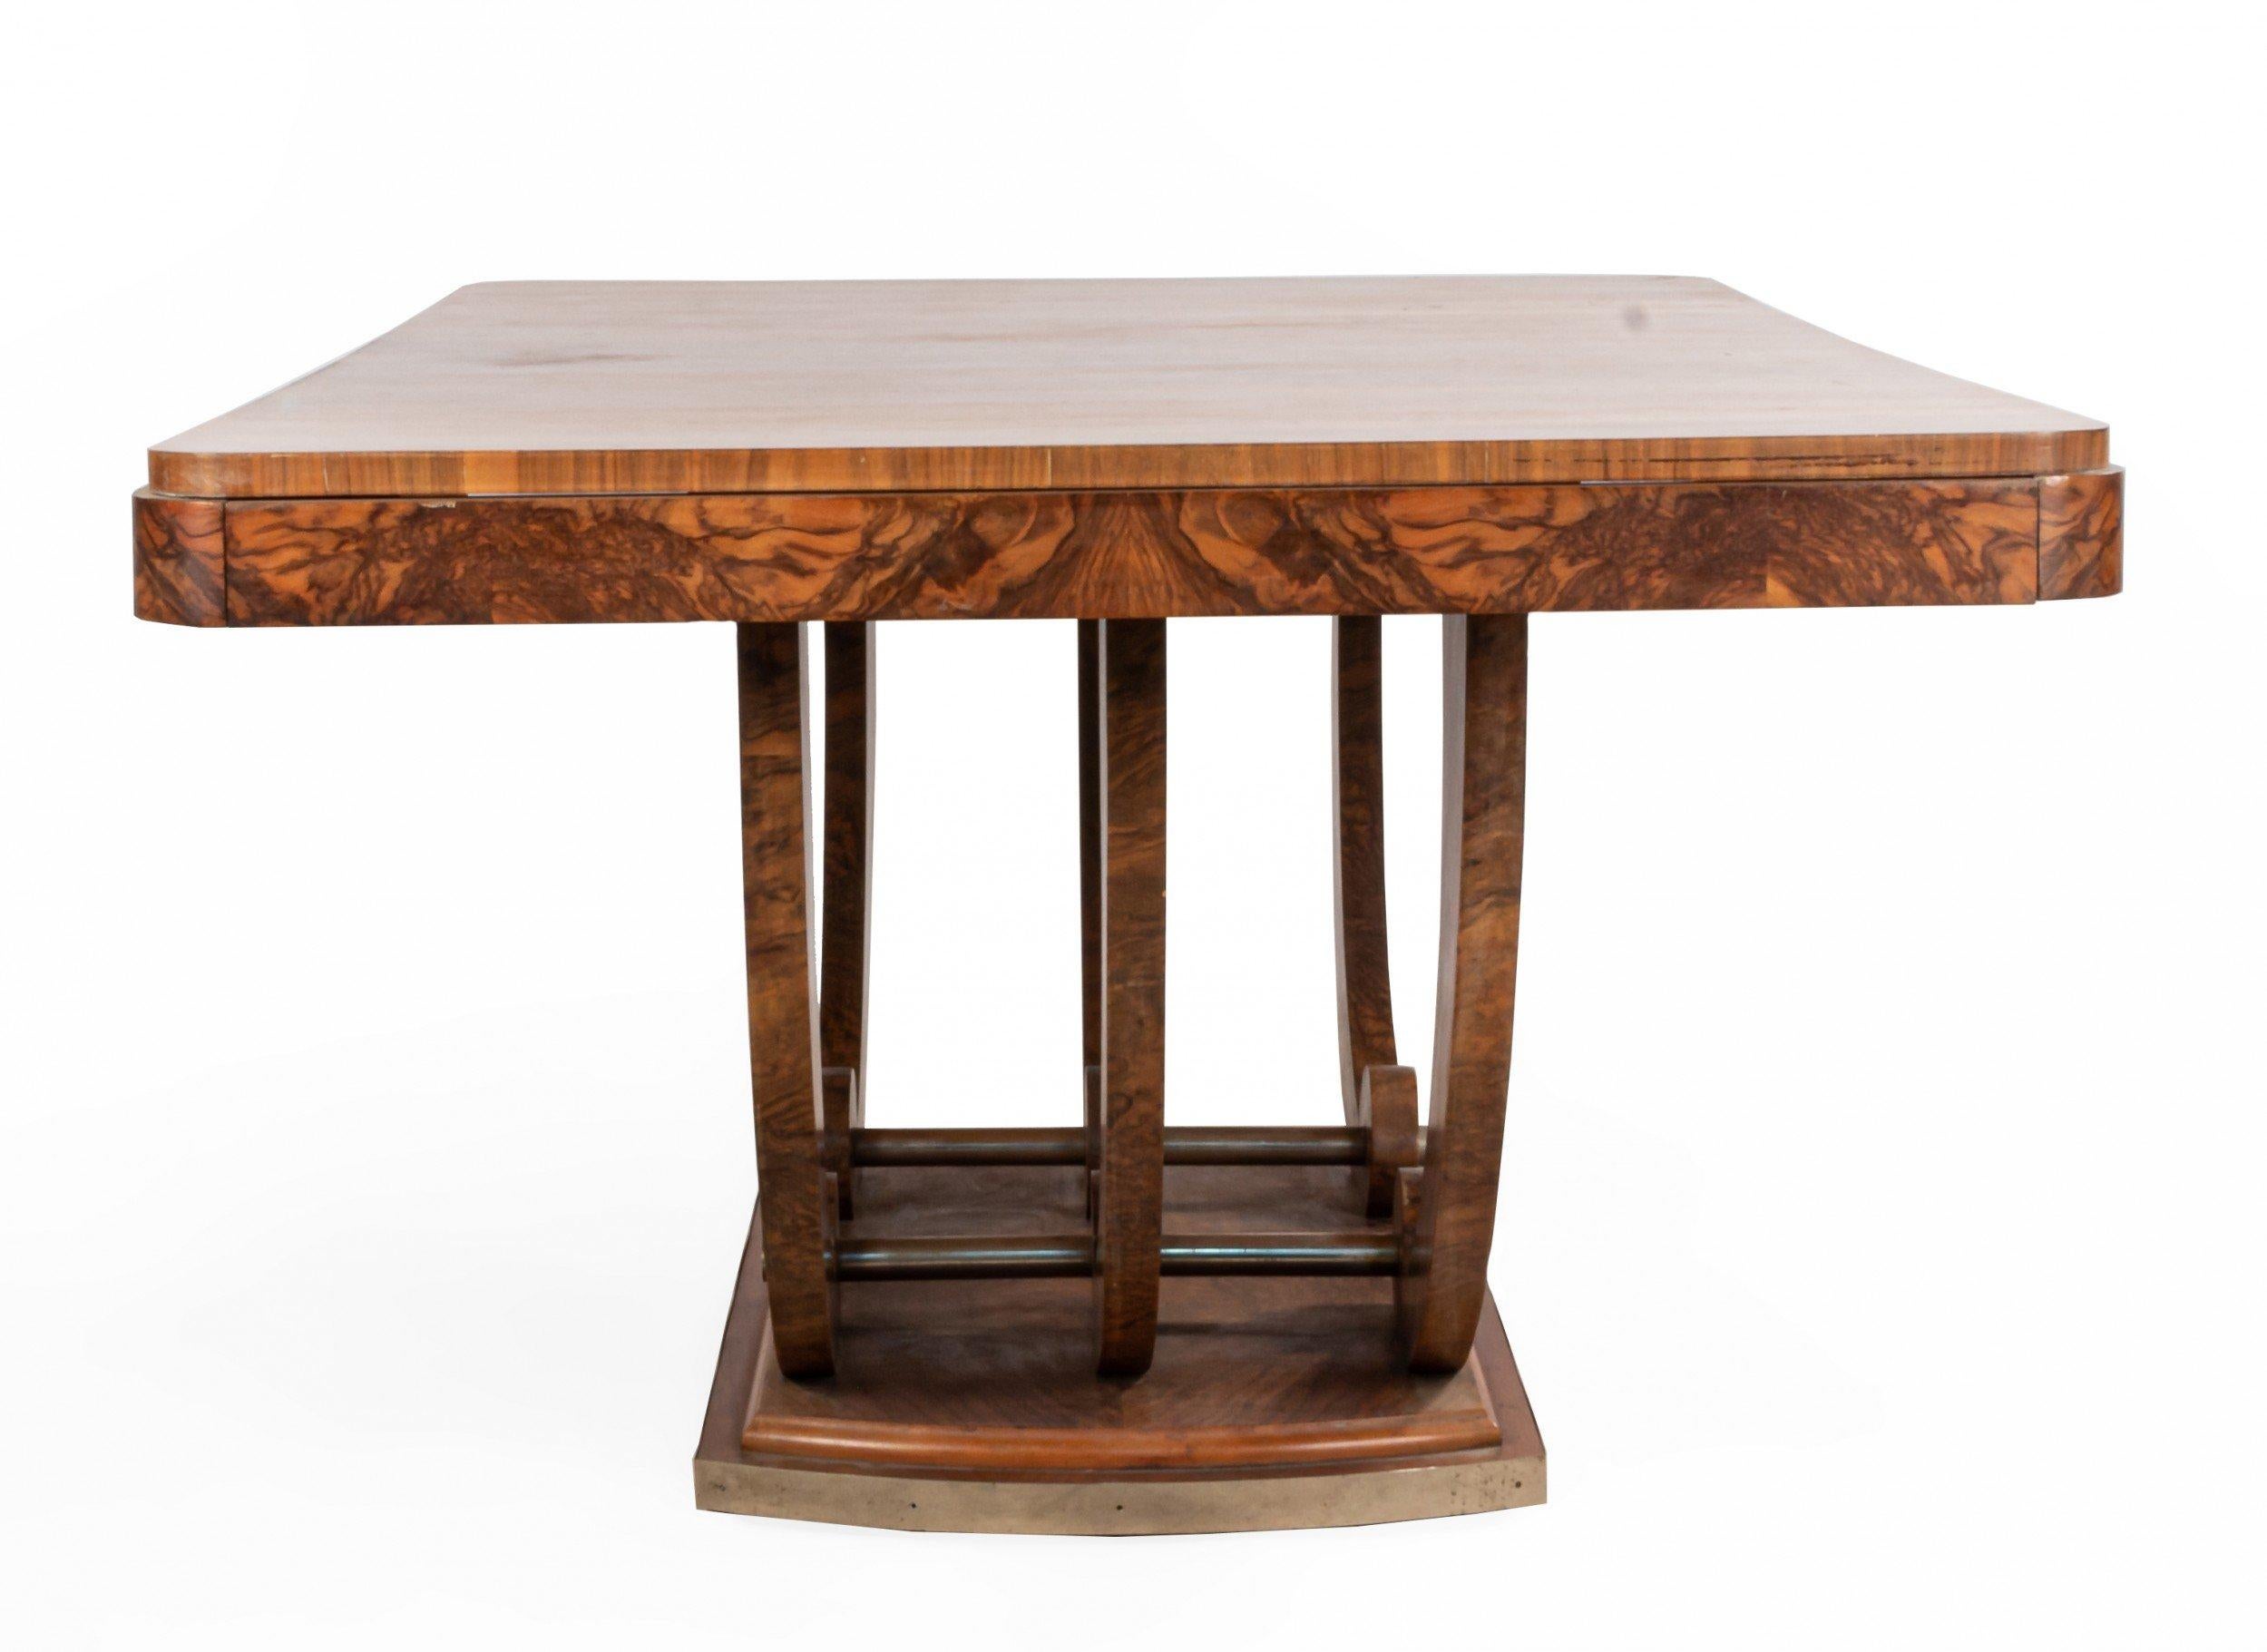 Burl Art Deco French Walnut Dining Table with a U-base